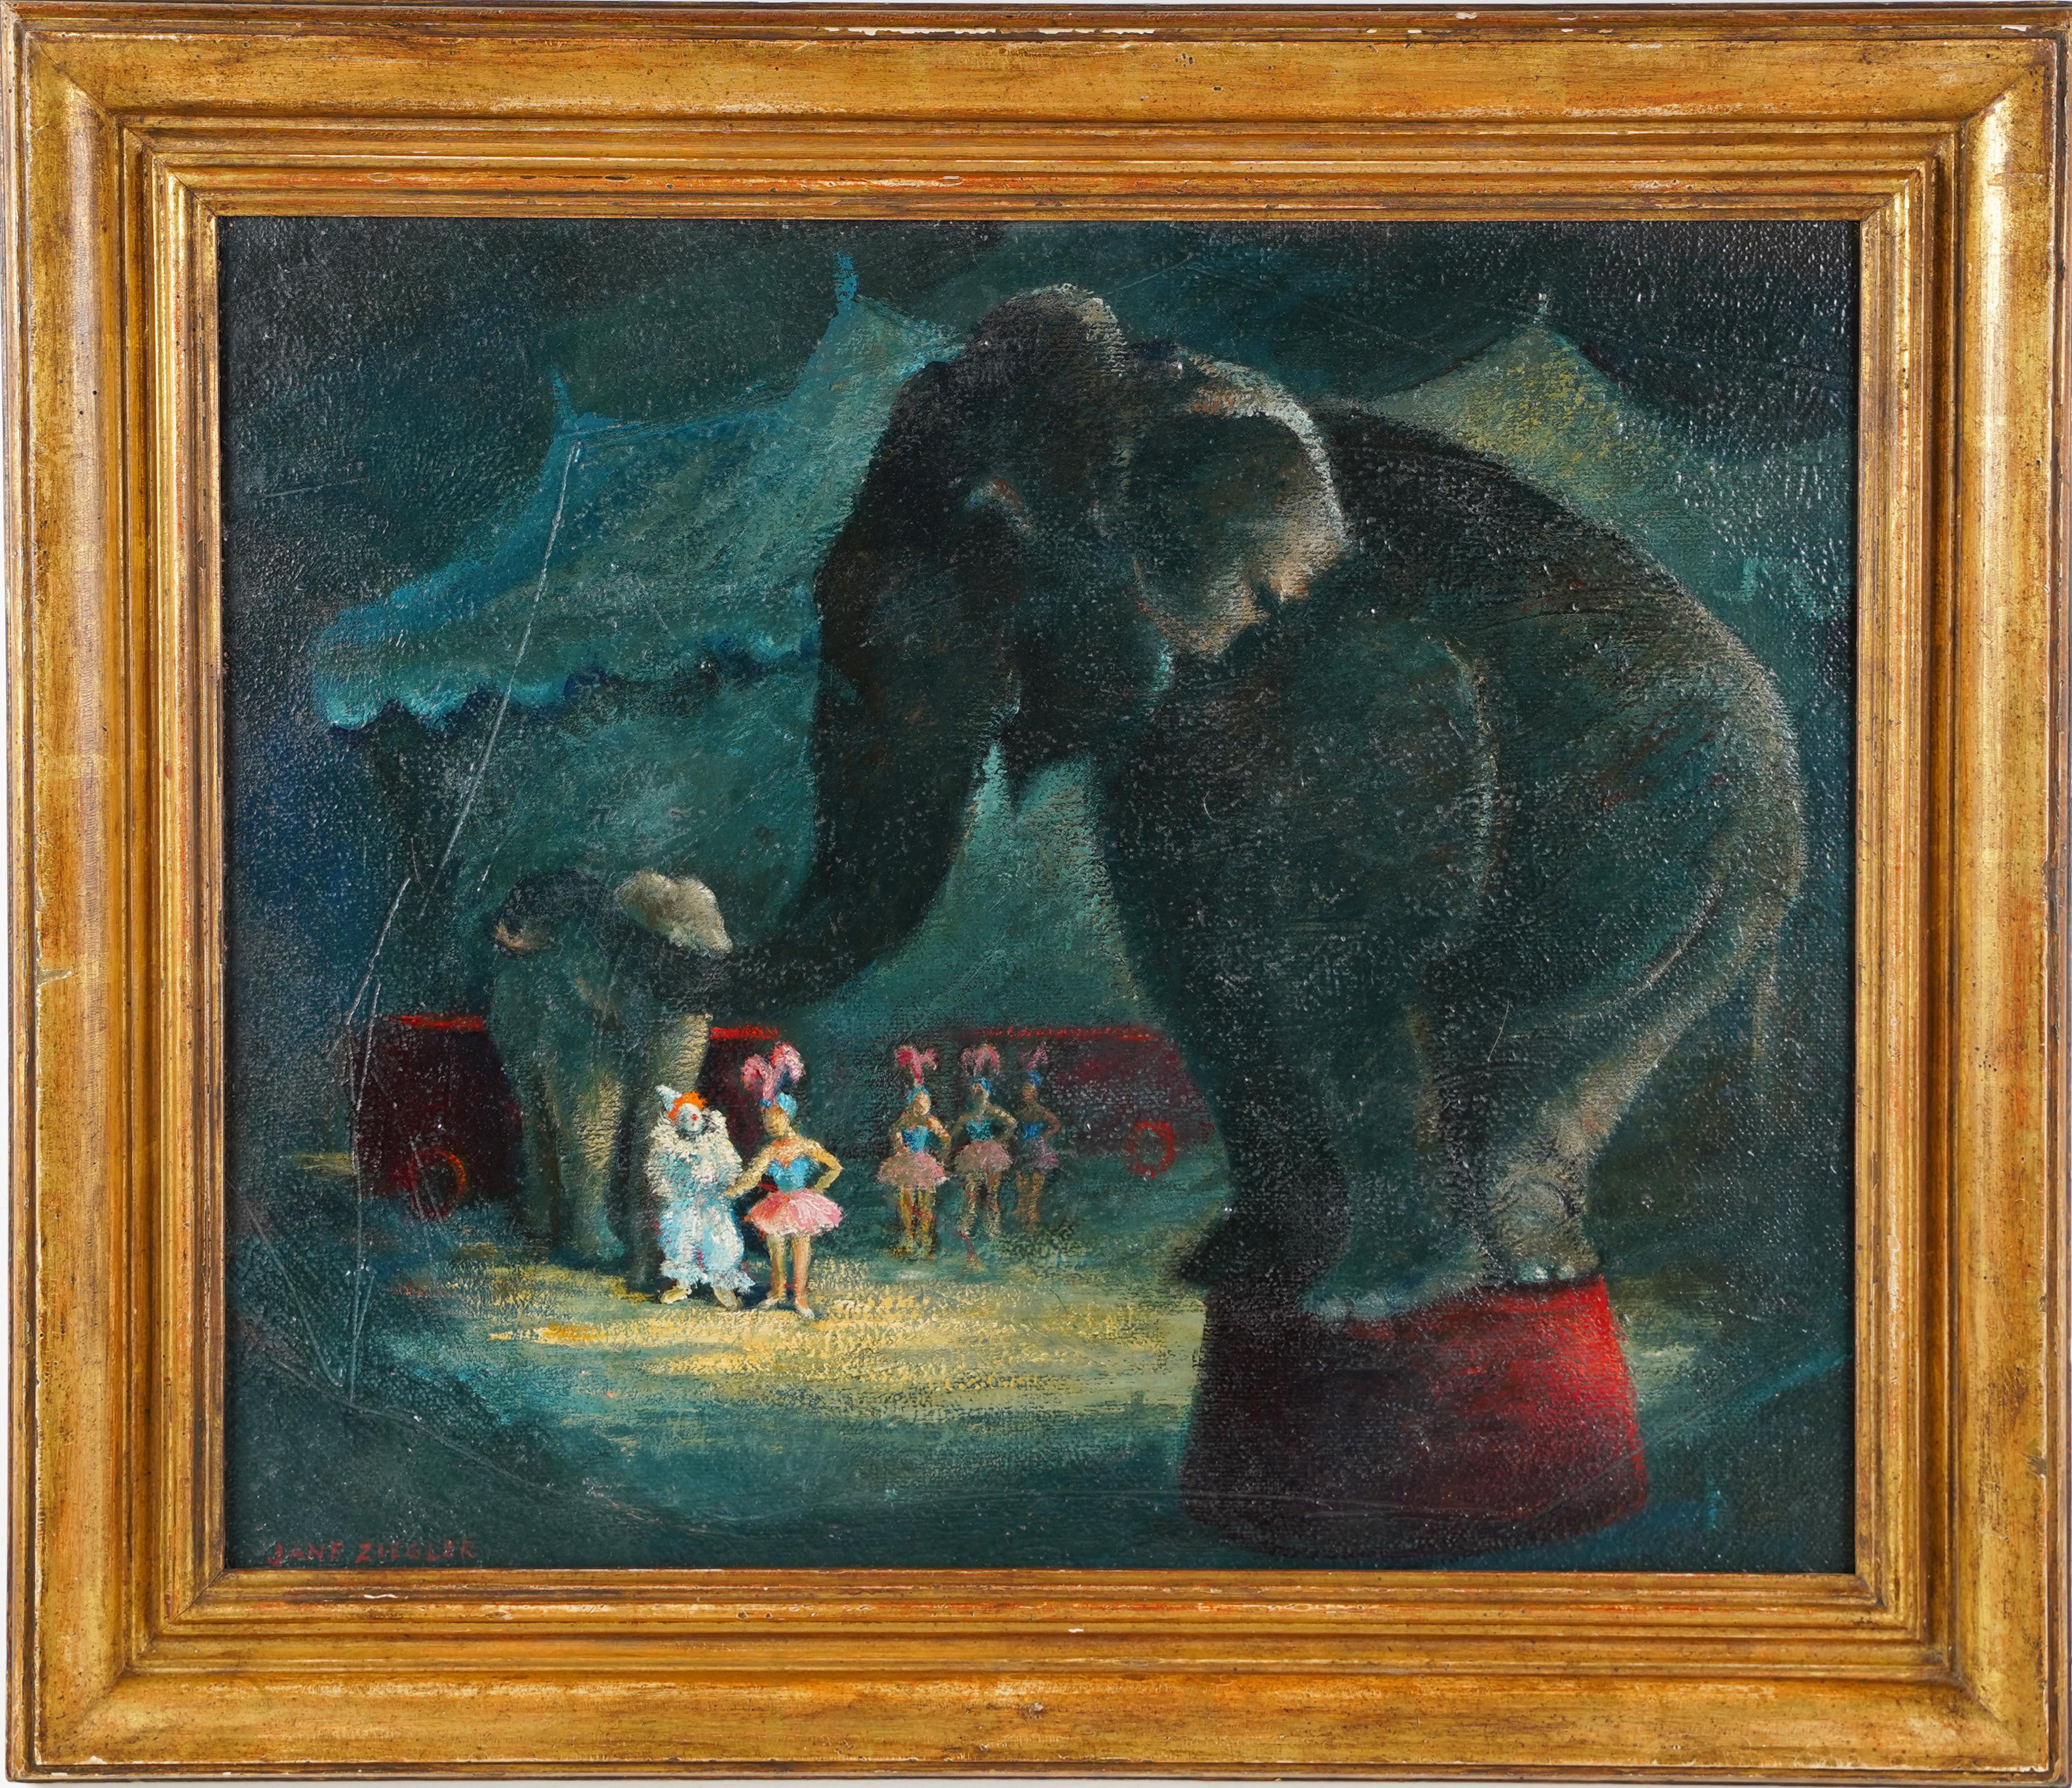 Antique American modernist signed circus oil painting.  Oil on board.  Signed.  Framed.  Image size, 24L x 20H.